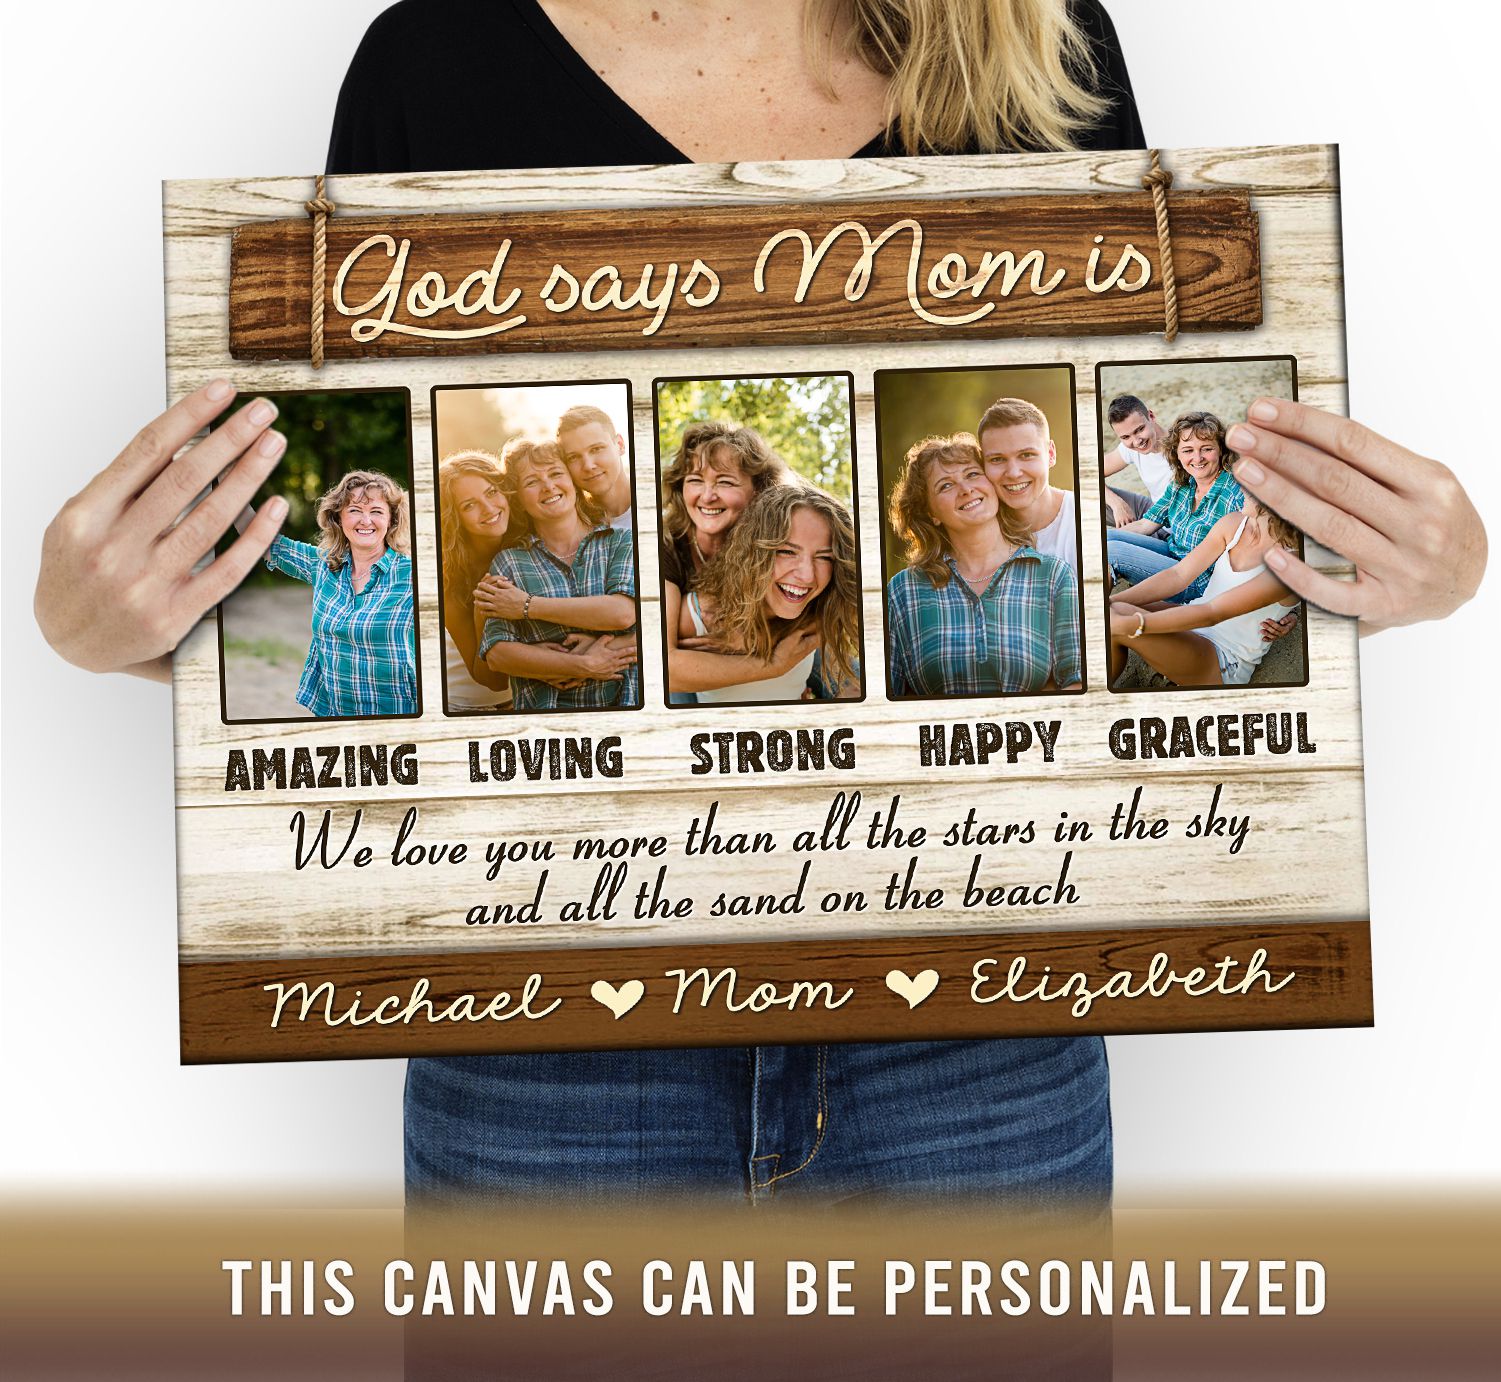 https://images.ohcanvas.com/ohcanvas_com/2022/03/07015158/awesome-mothers-day-ideas-personalized-photo-and-names-canvas-print02.jpg